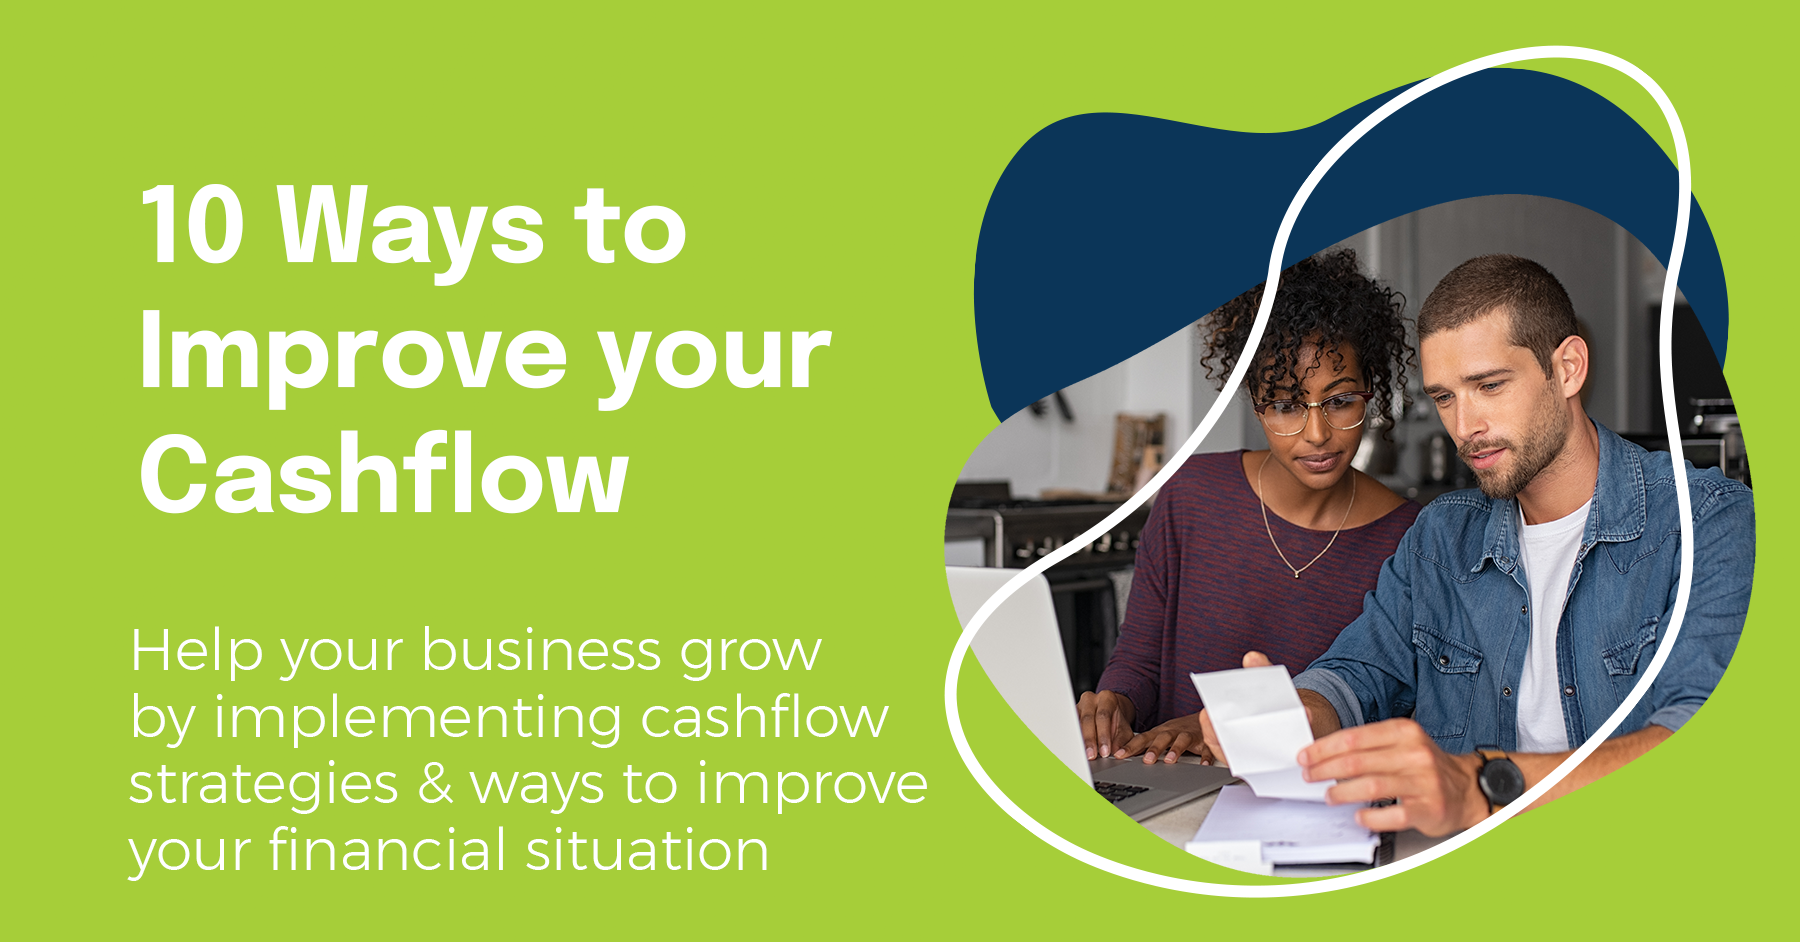 10 ways to improve cashflow for your small business